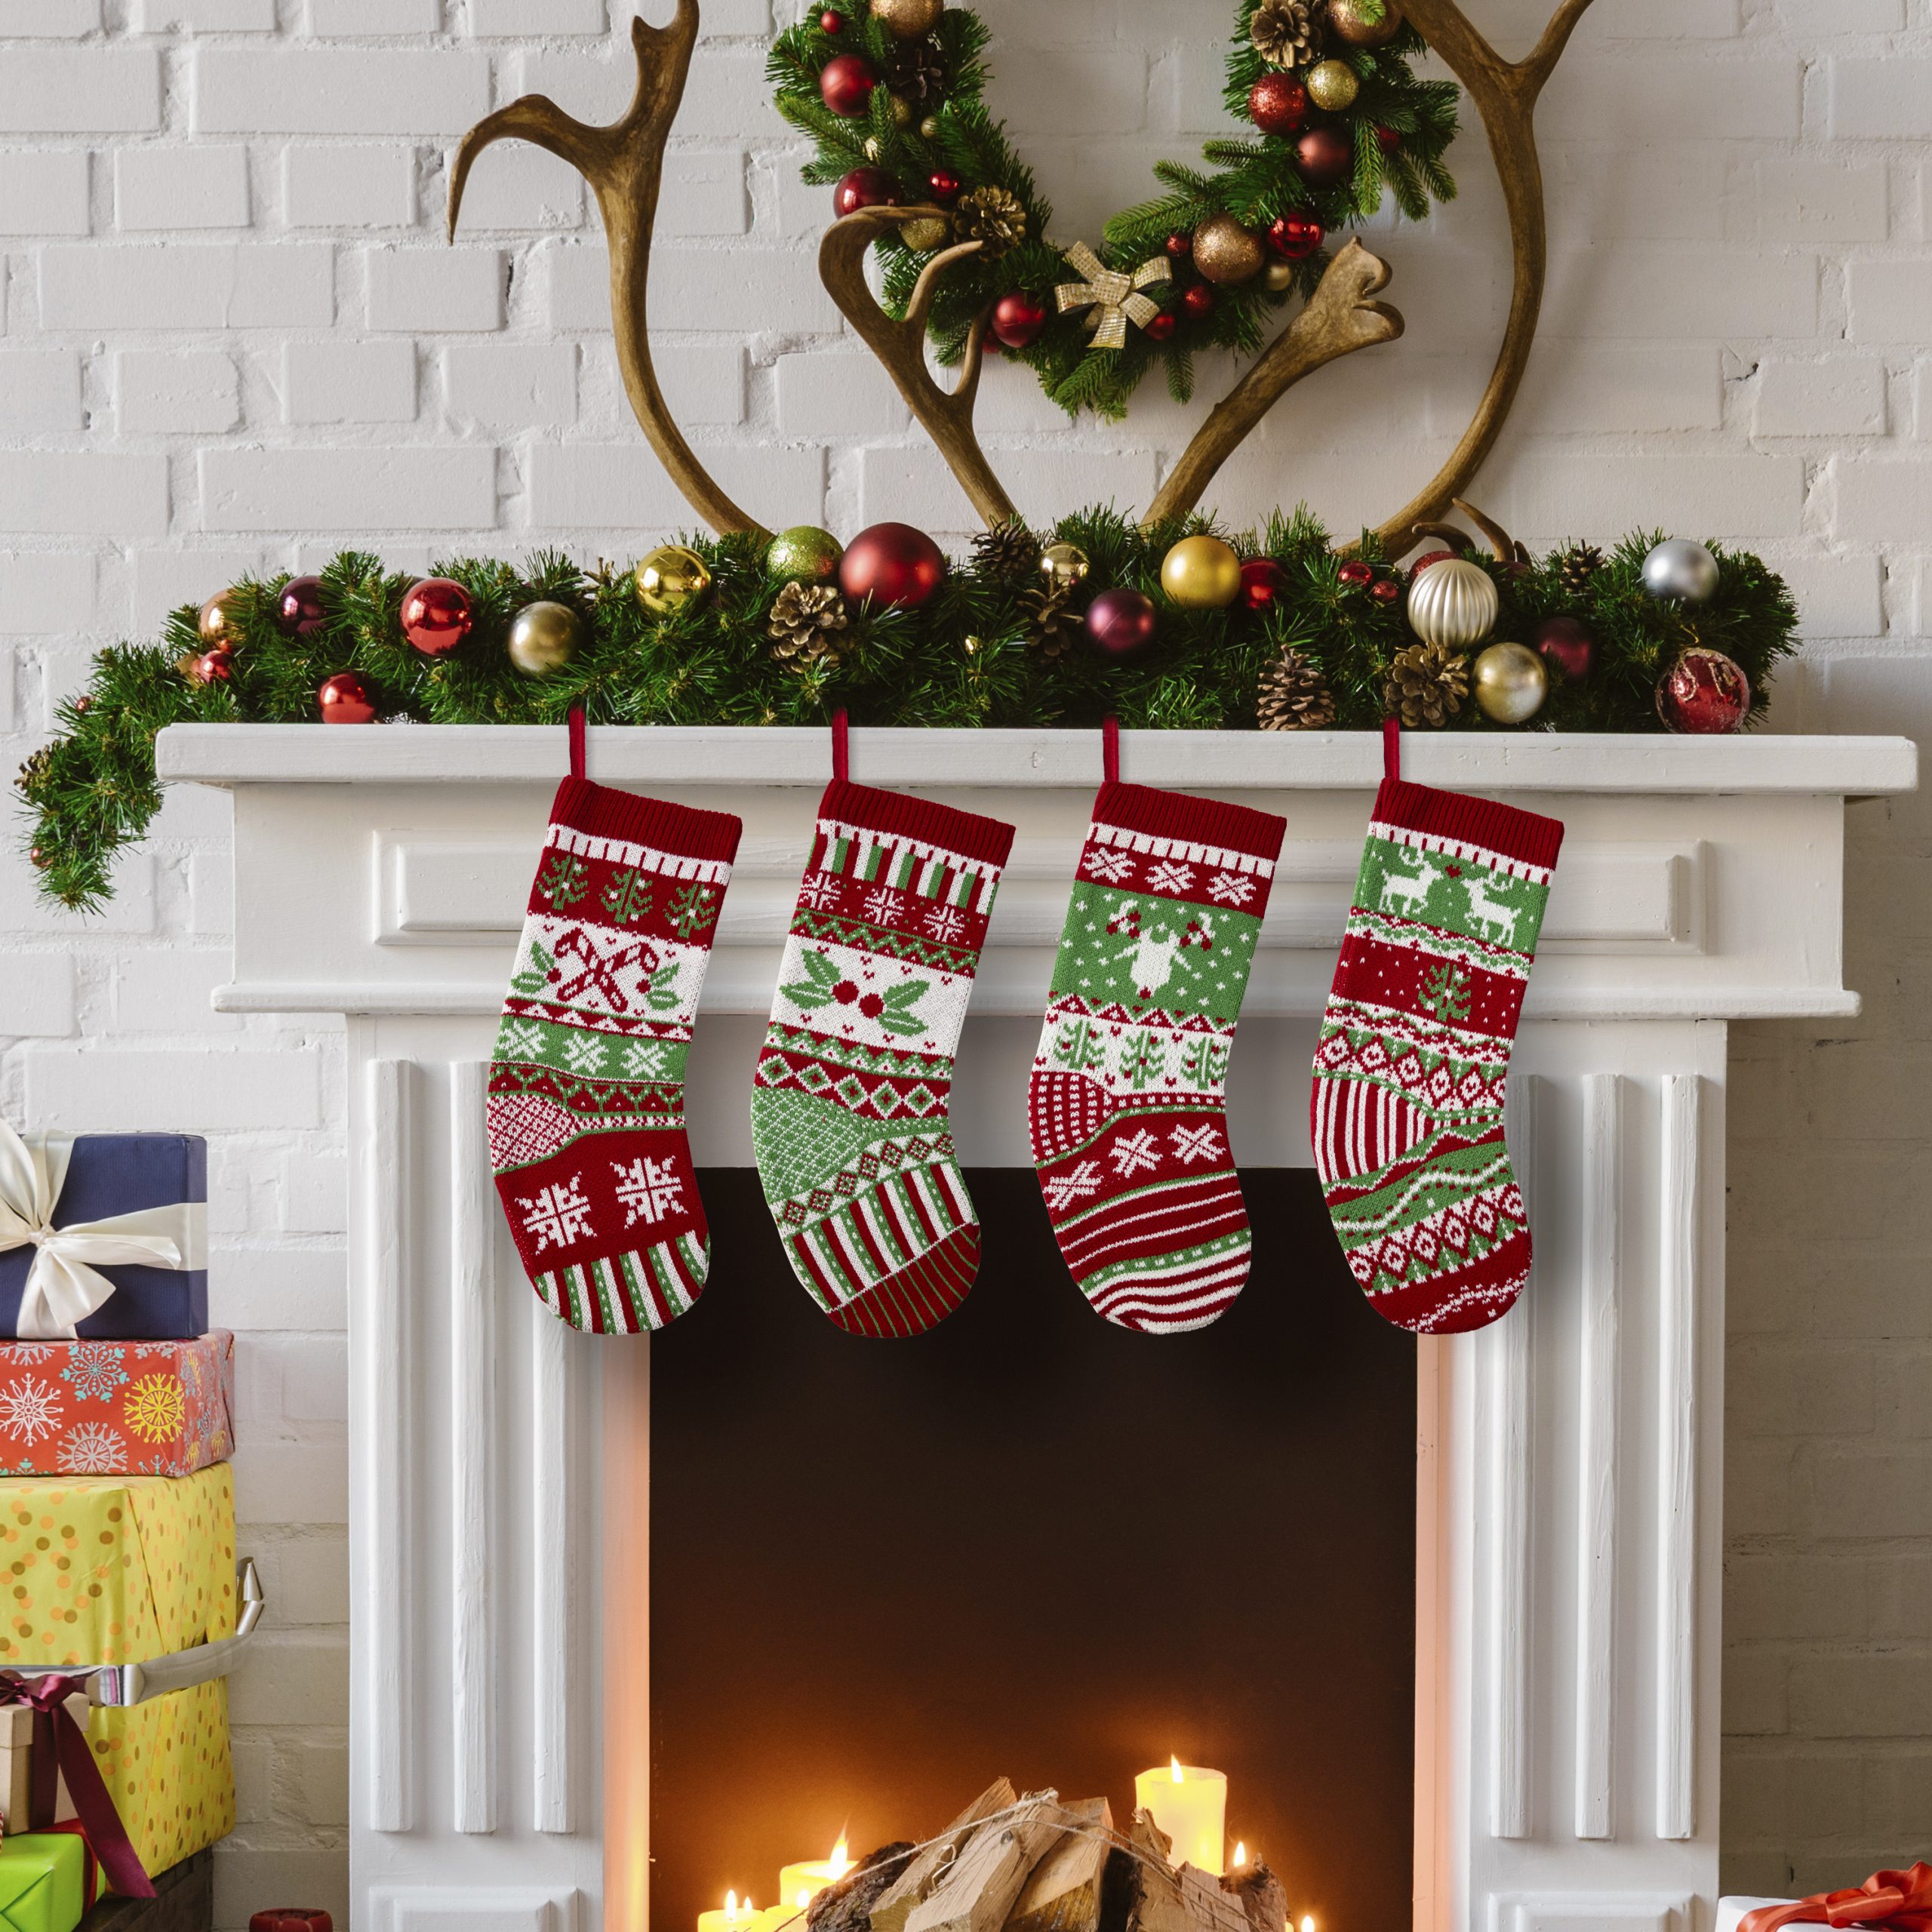 You are currently viewing What to put in Christmas stockings?